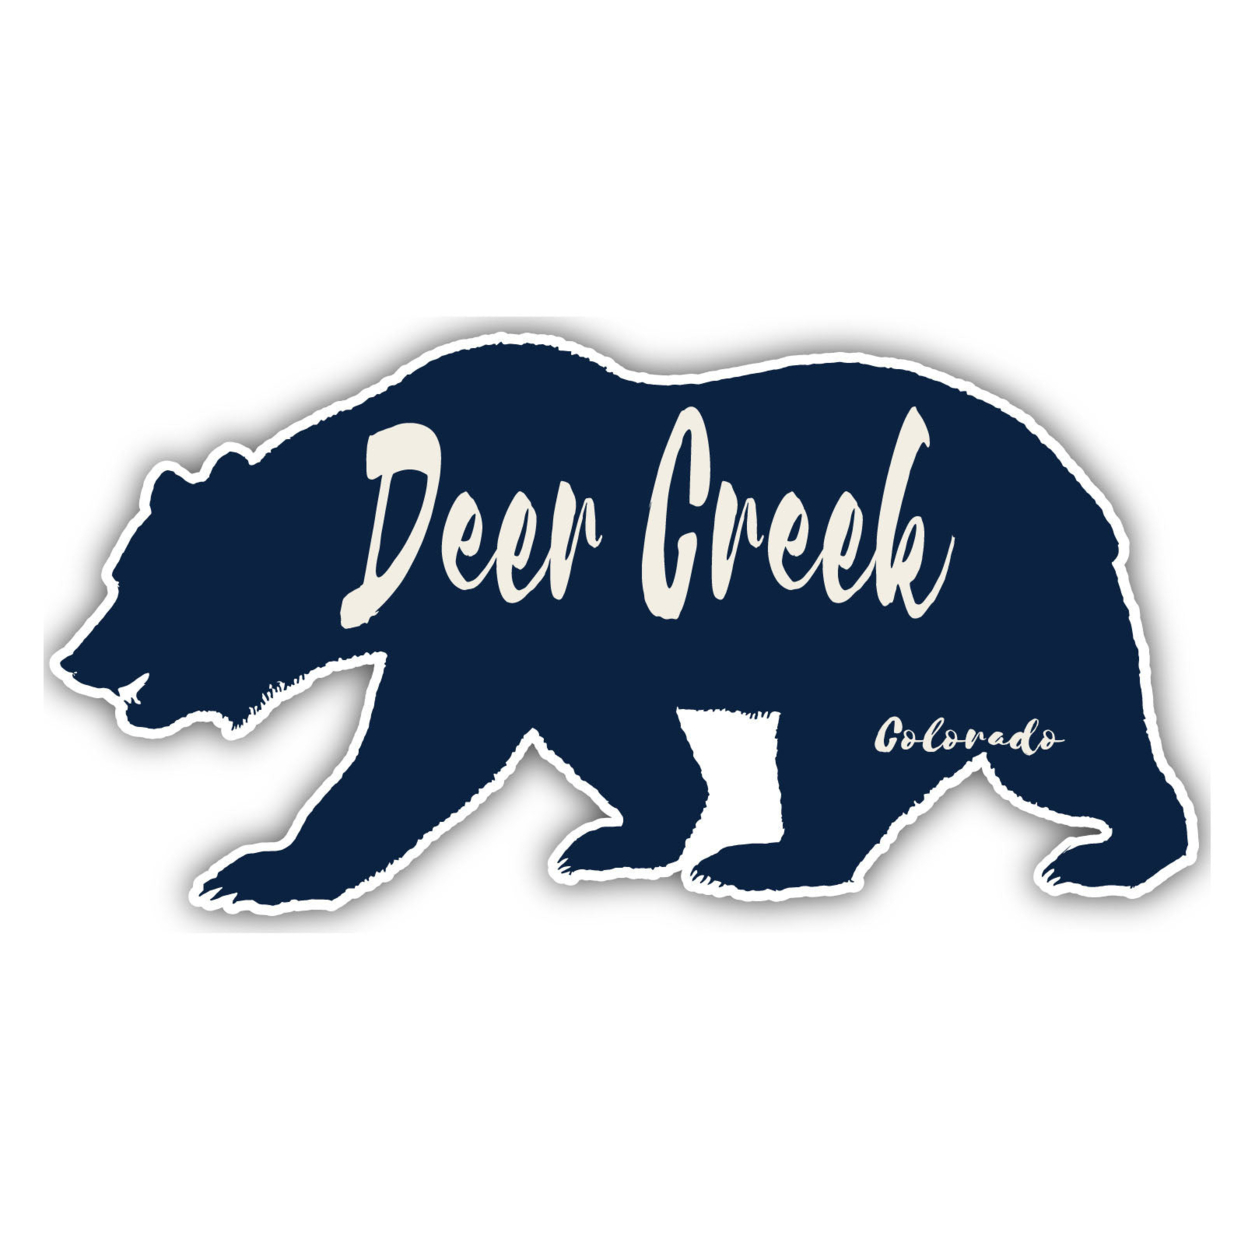 Deer Creek Colorado Souvenir Decorative Stickers (Choose Theme And Size) - 4-Pack, 4-Inch, Great Outdoors